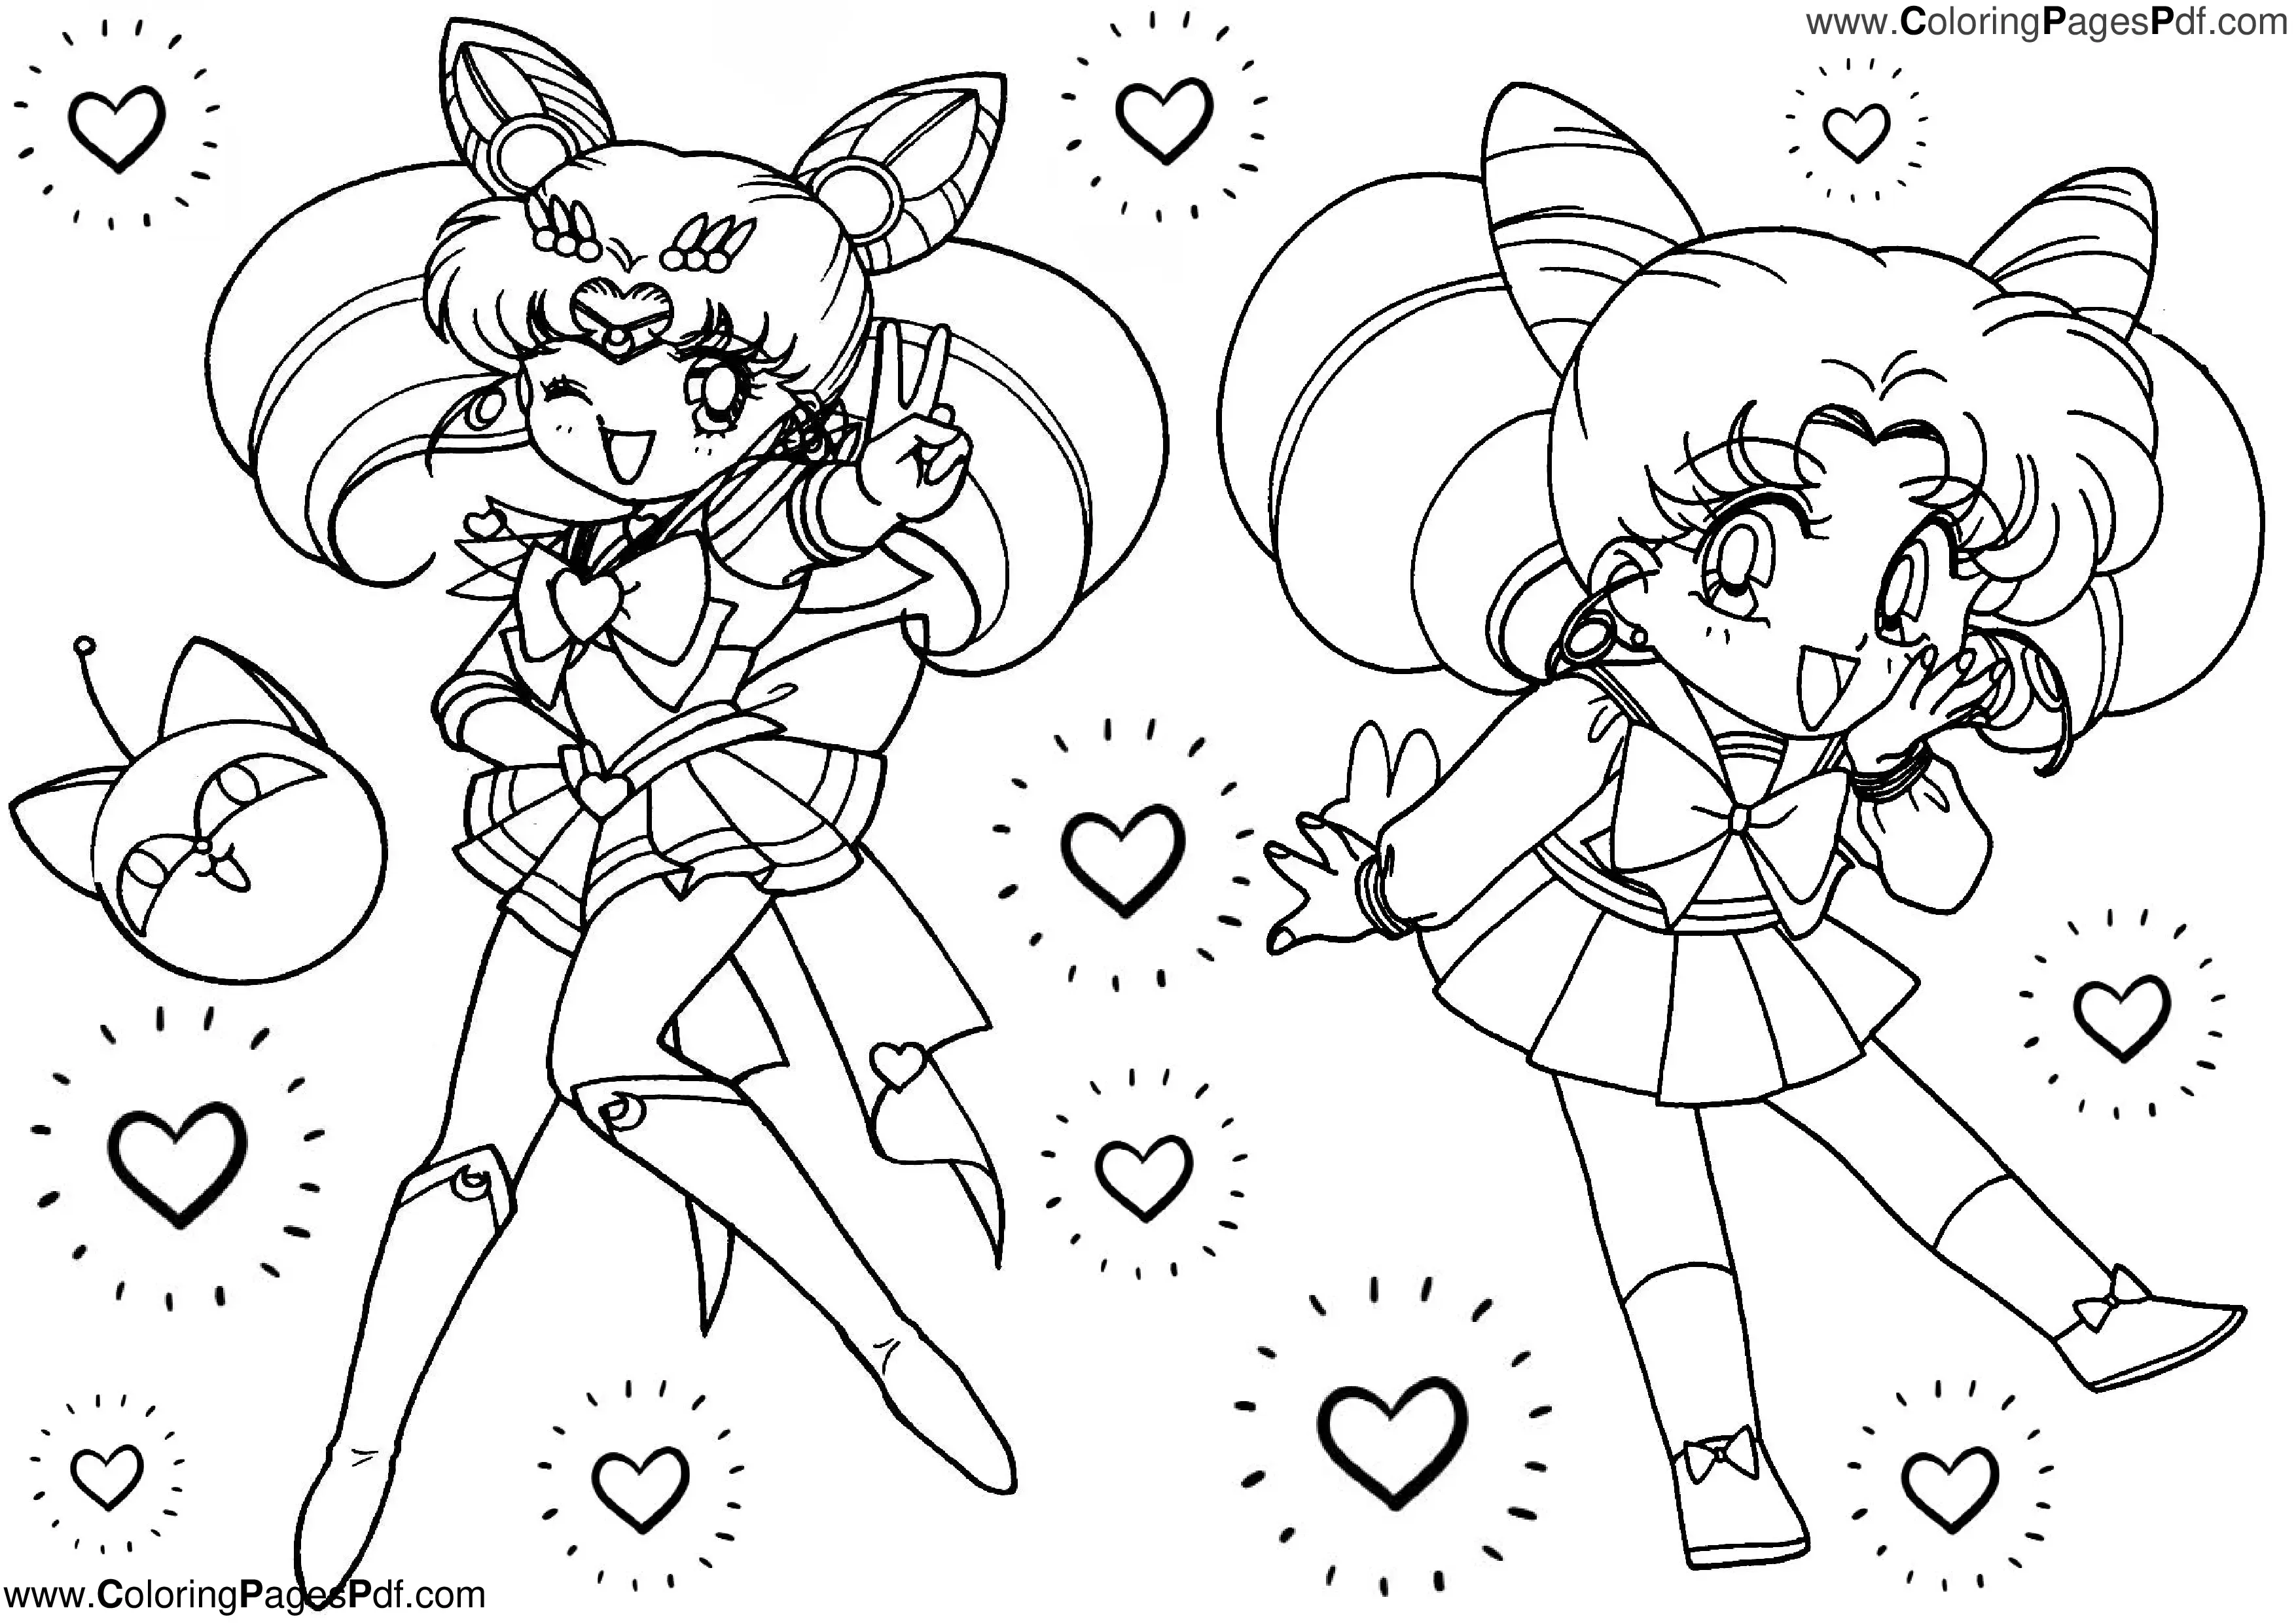 Cute sailor moon coloring pages